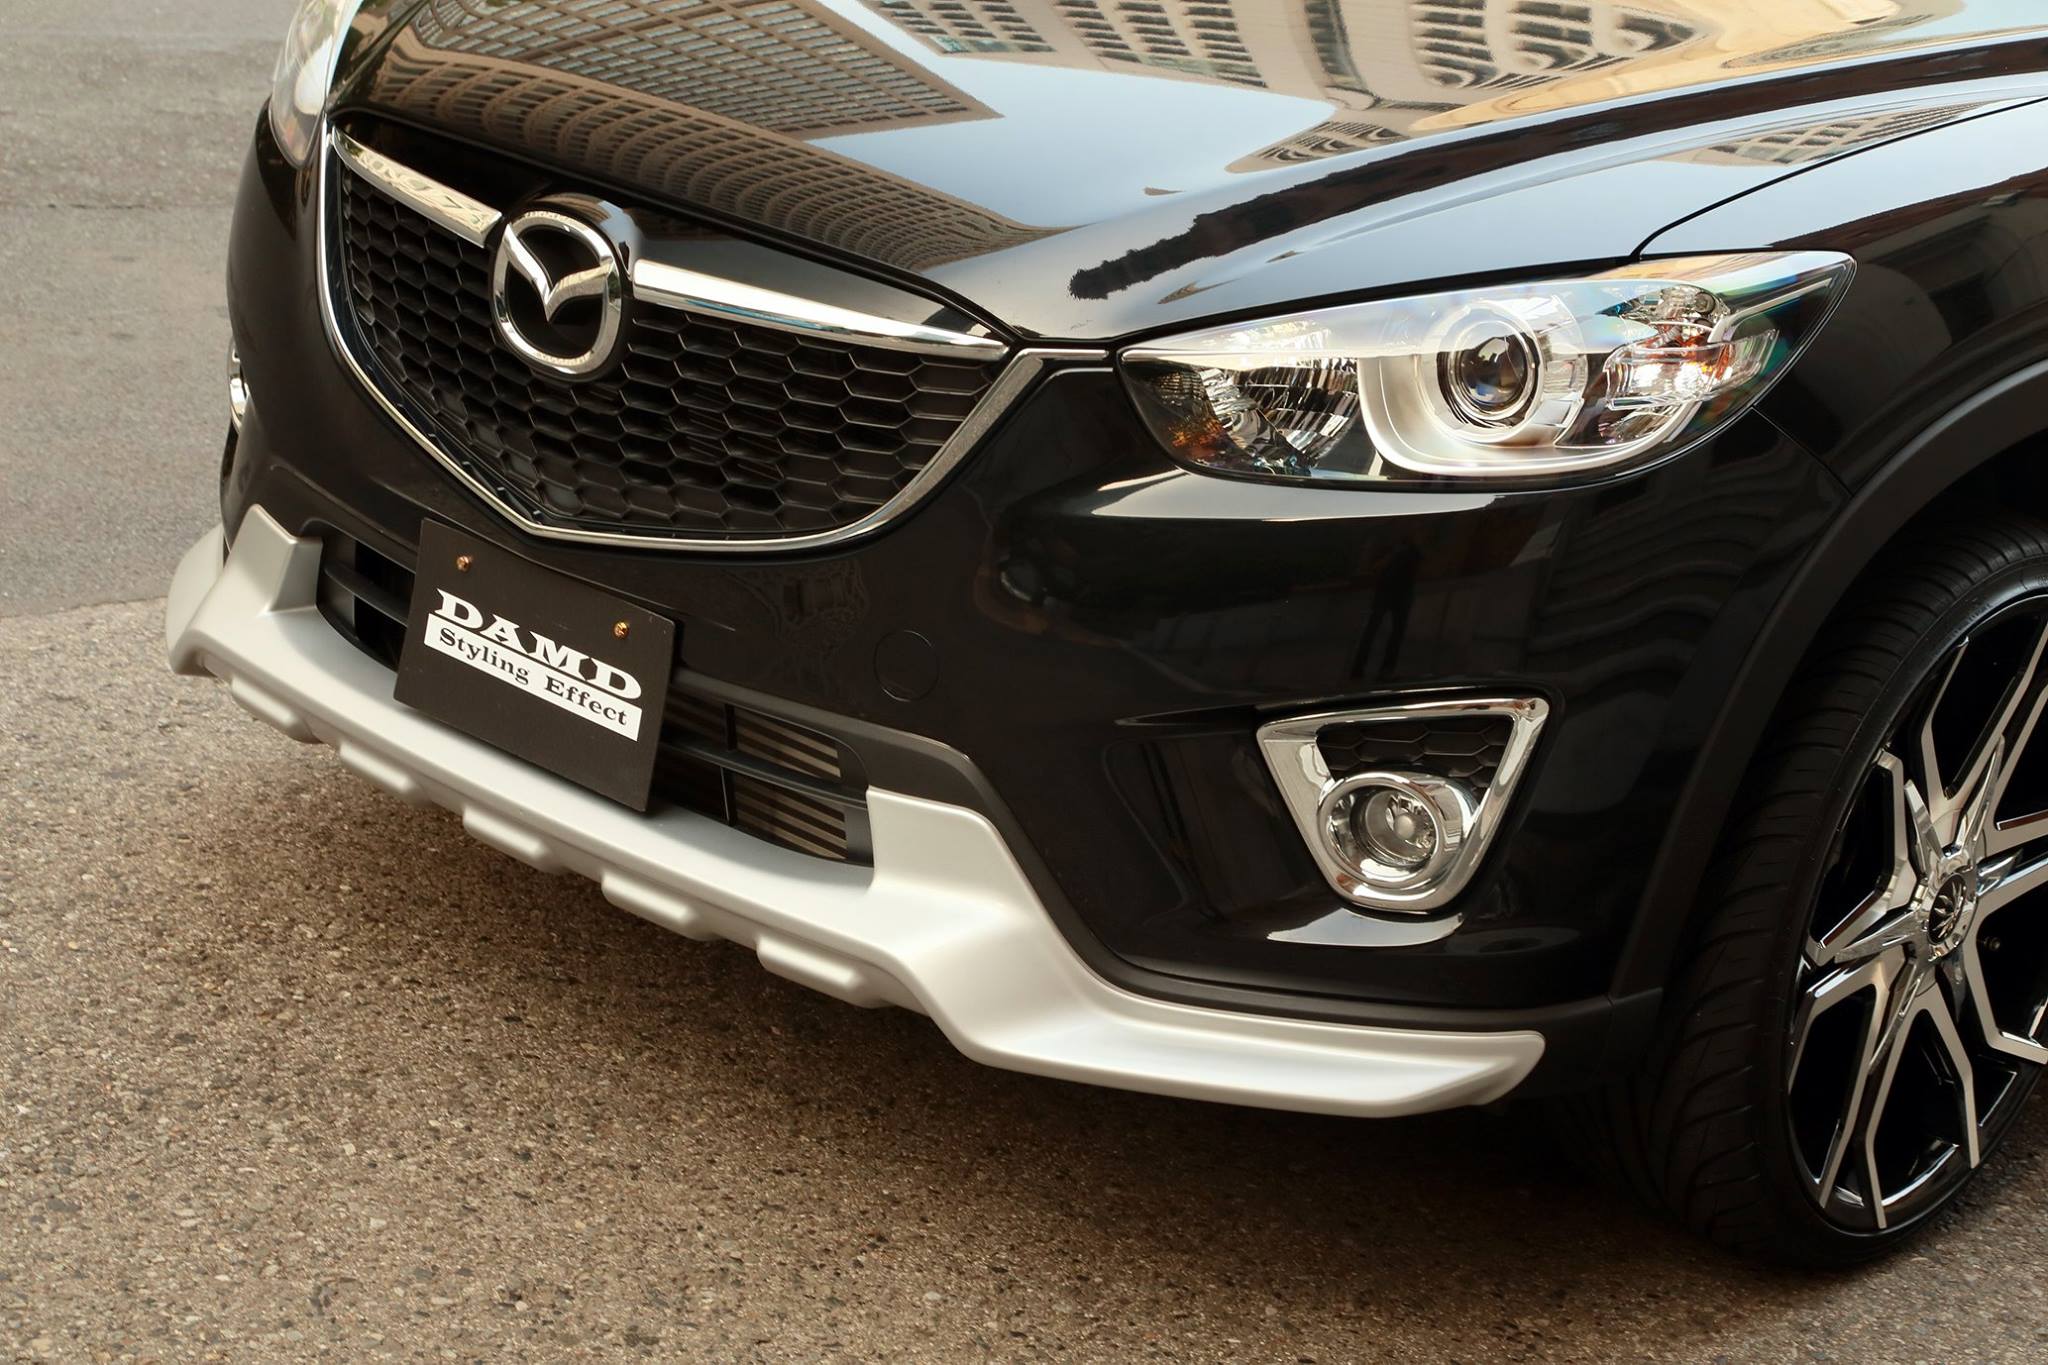 Mazda CX-5 SUV Gets a Silver Chin from Japanese Tuner DAMD - autoevolution